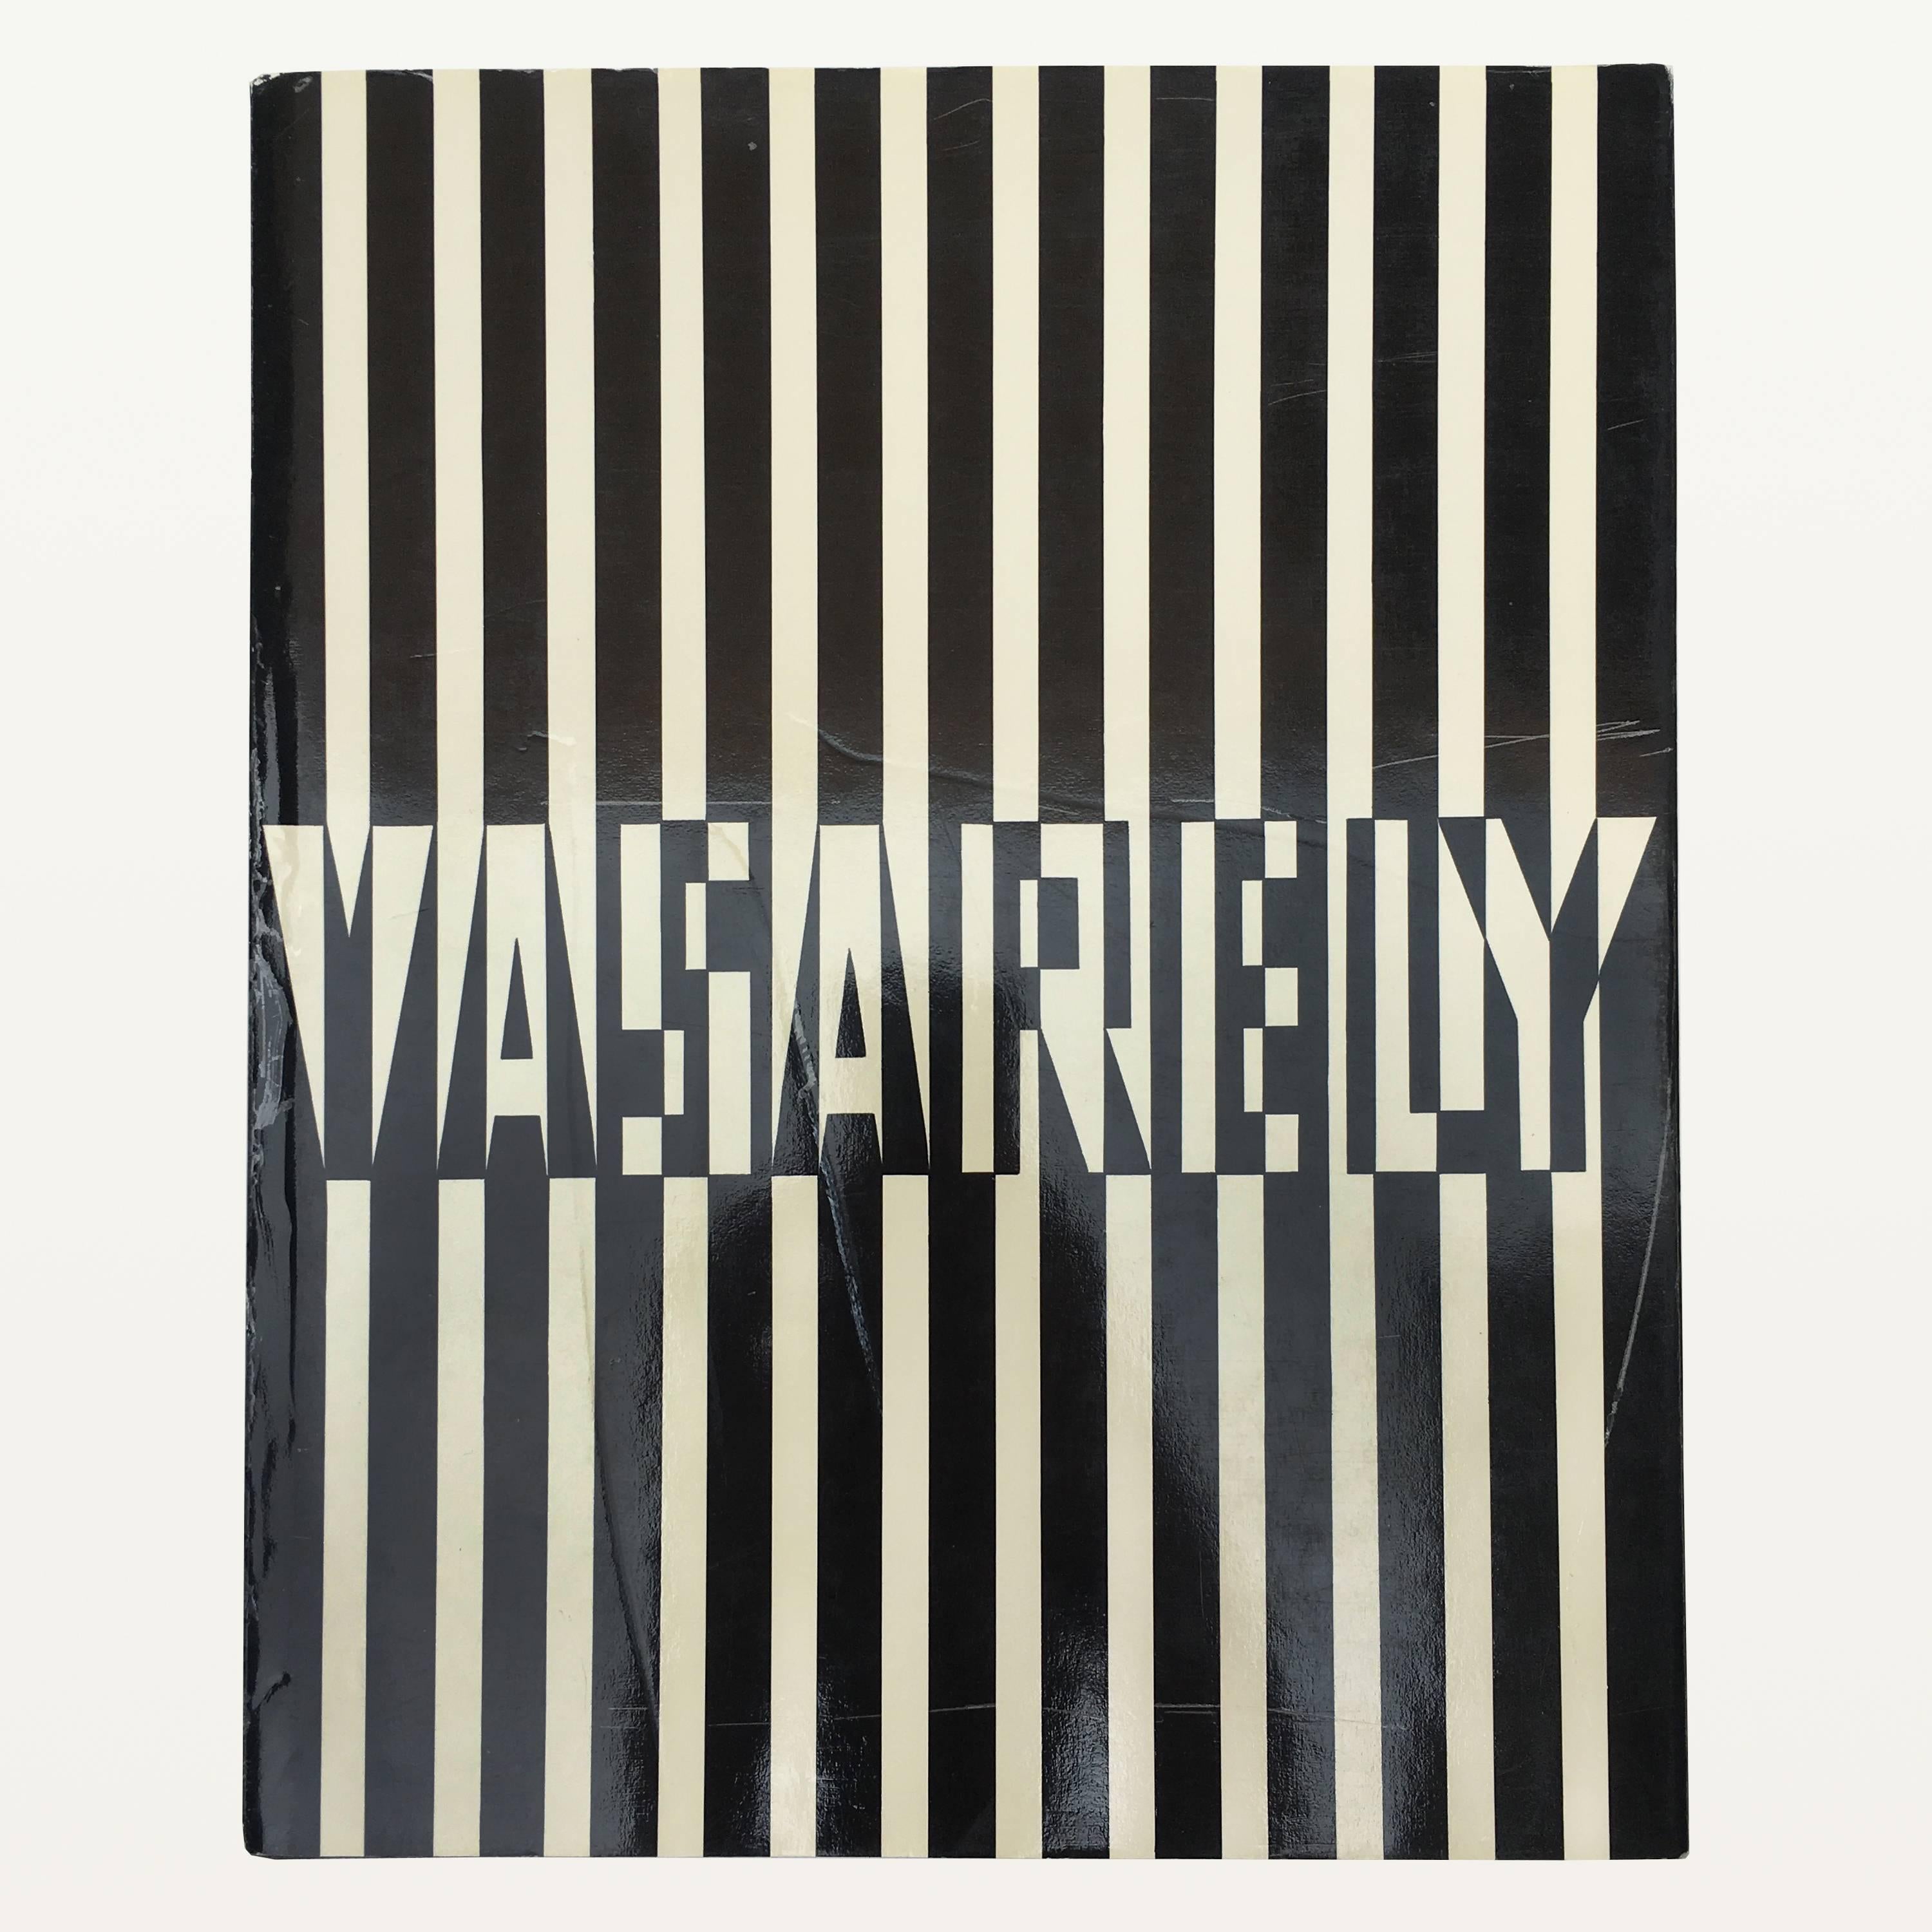 Vasarely I – Published by E´ditions du Griffon Neutcha^tel, 1974.
Vasarely II – Published by E´ditions du Griffon Neutcha^tel, 1973.
Vasarely III – First edition, published by E´ditions du Griffon Neutcha^tel, 1974.
Vasarely IV – First edition,